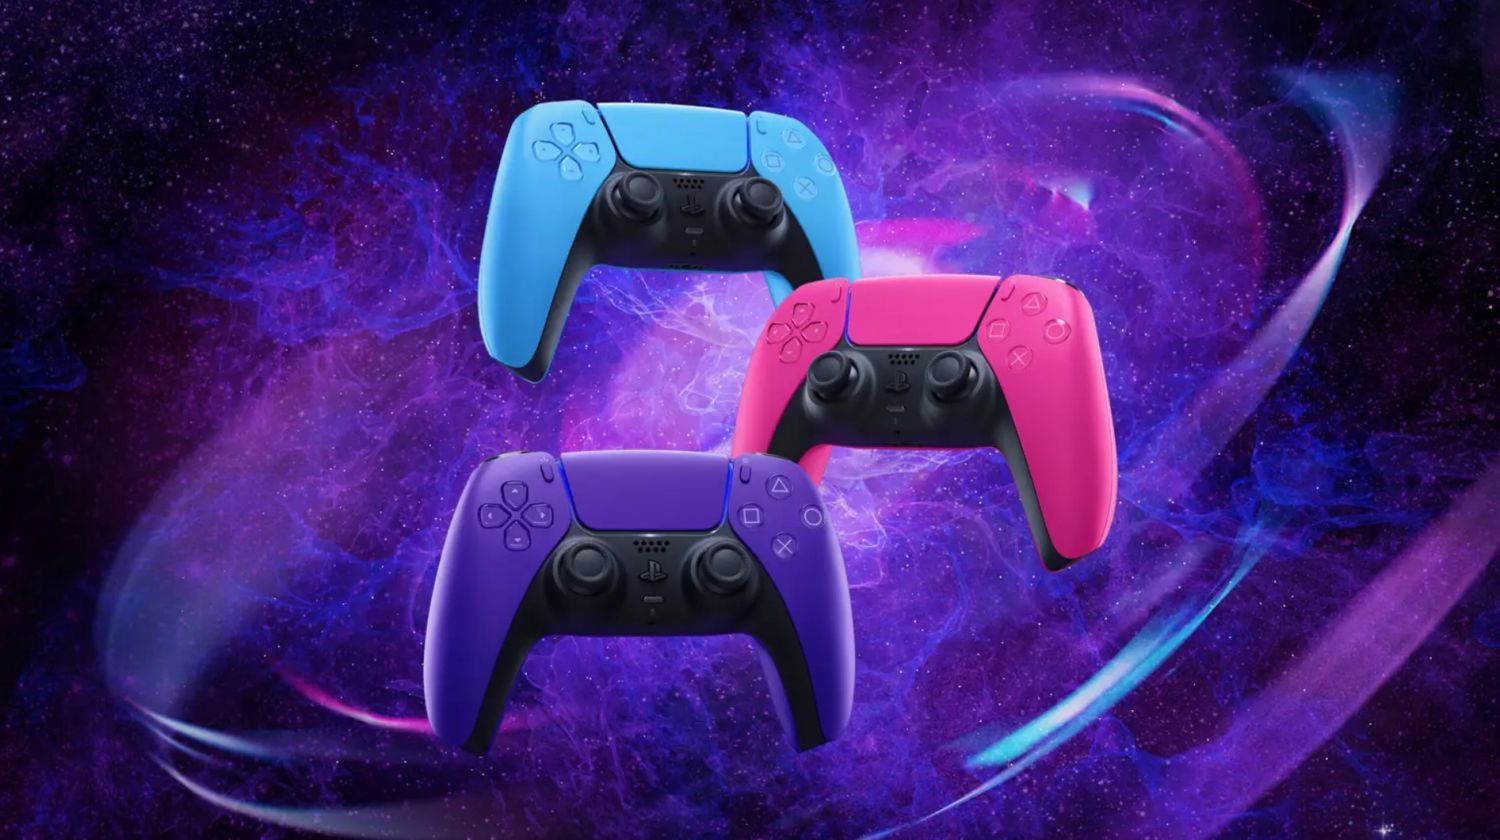 Matching DualSense controllers with new PS5 covers